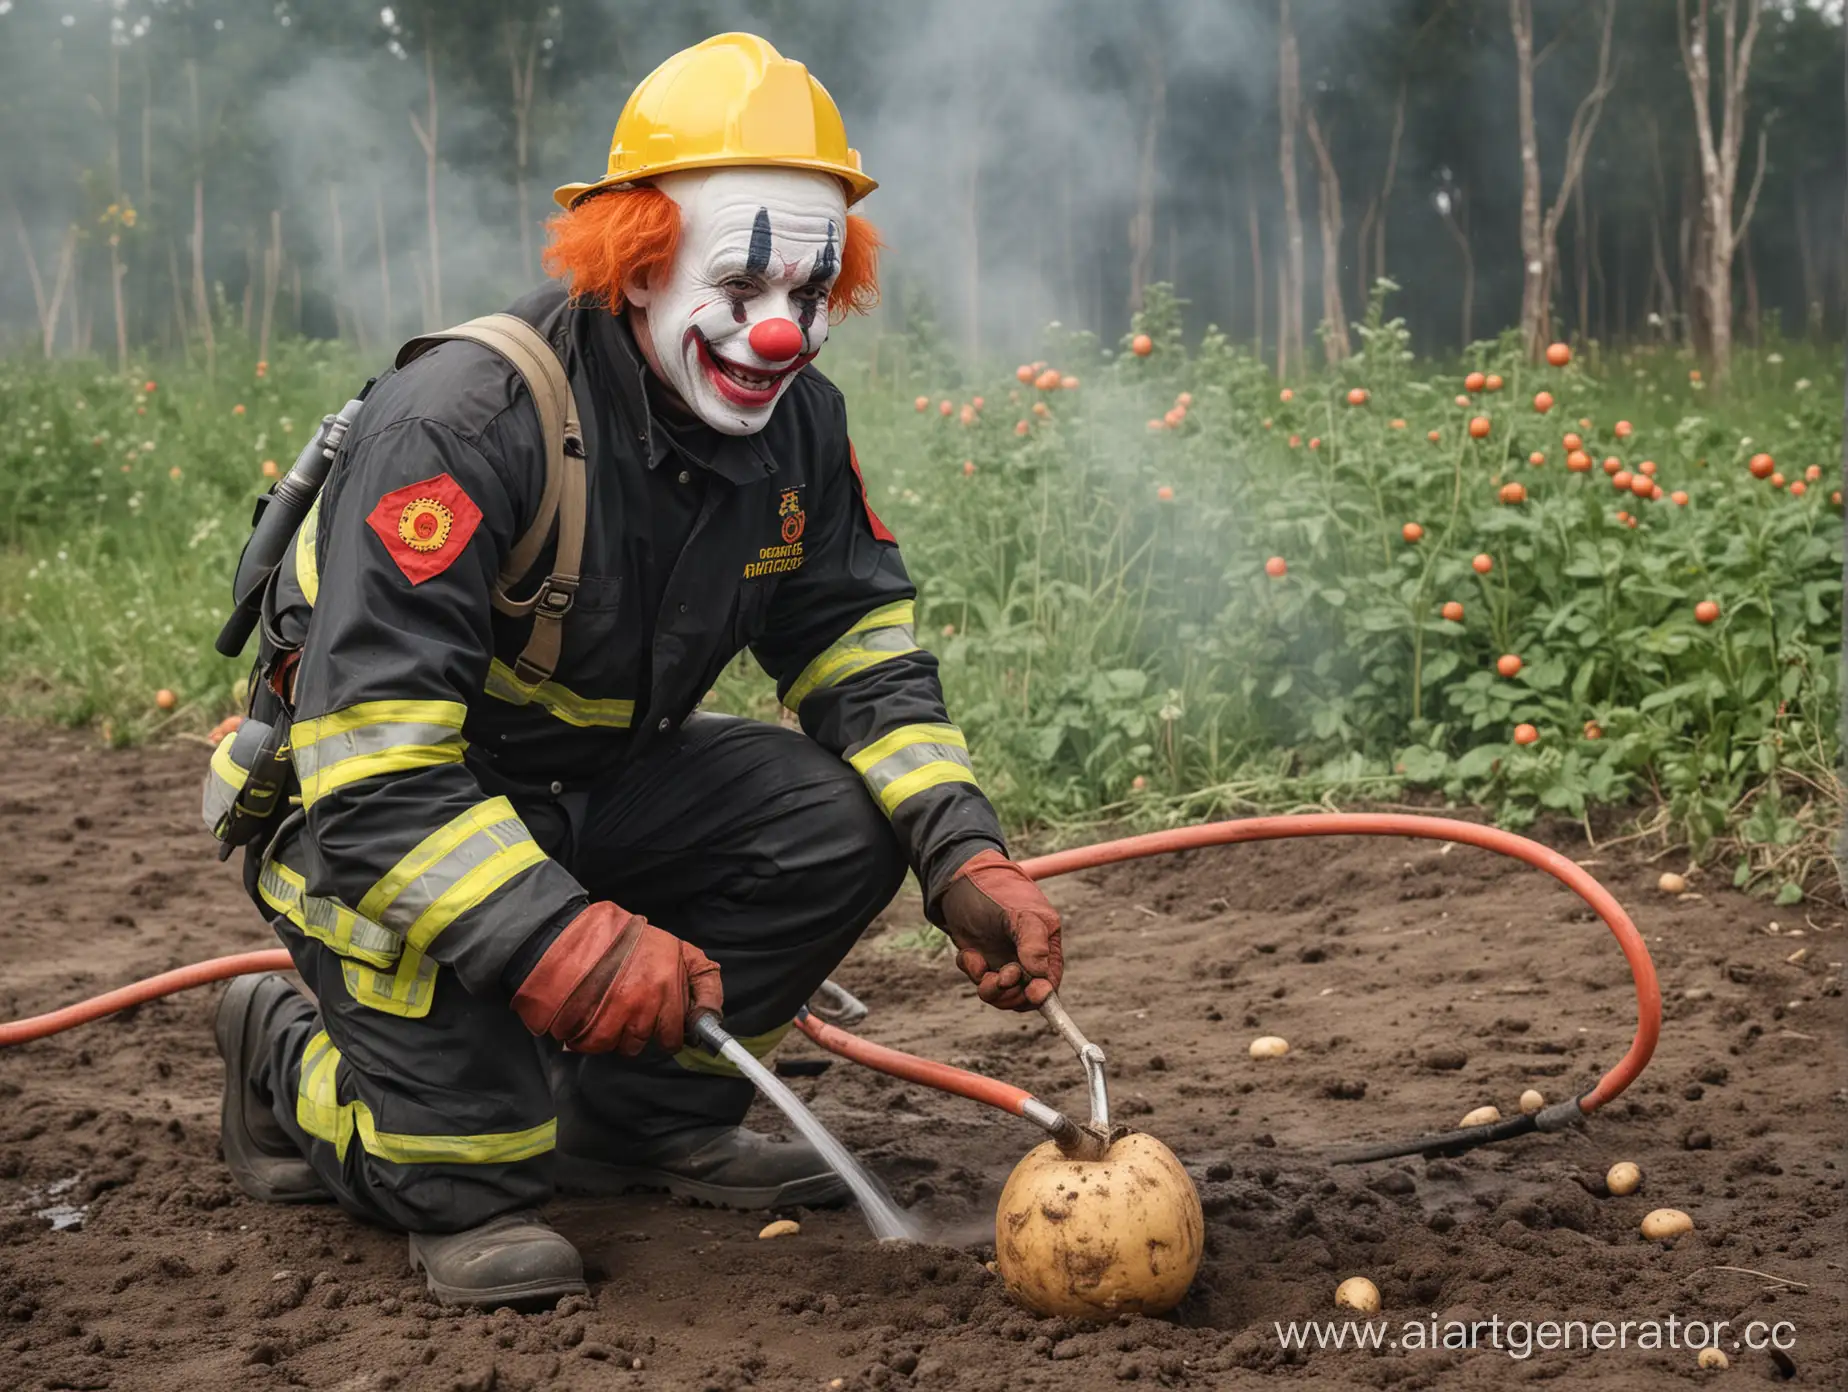 Firefighter-Clown-Extinguishing-Potatoes-with-Hose